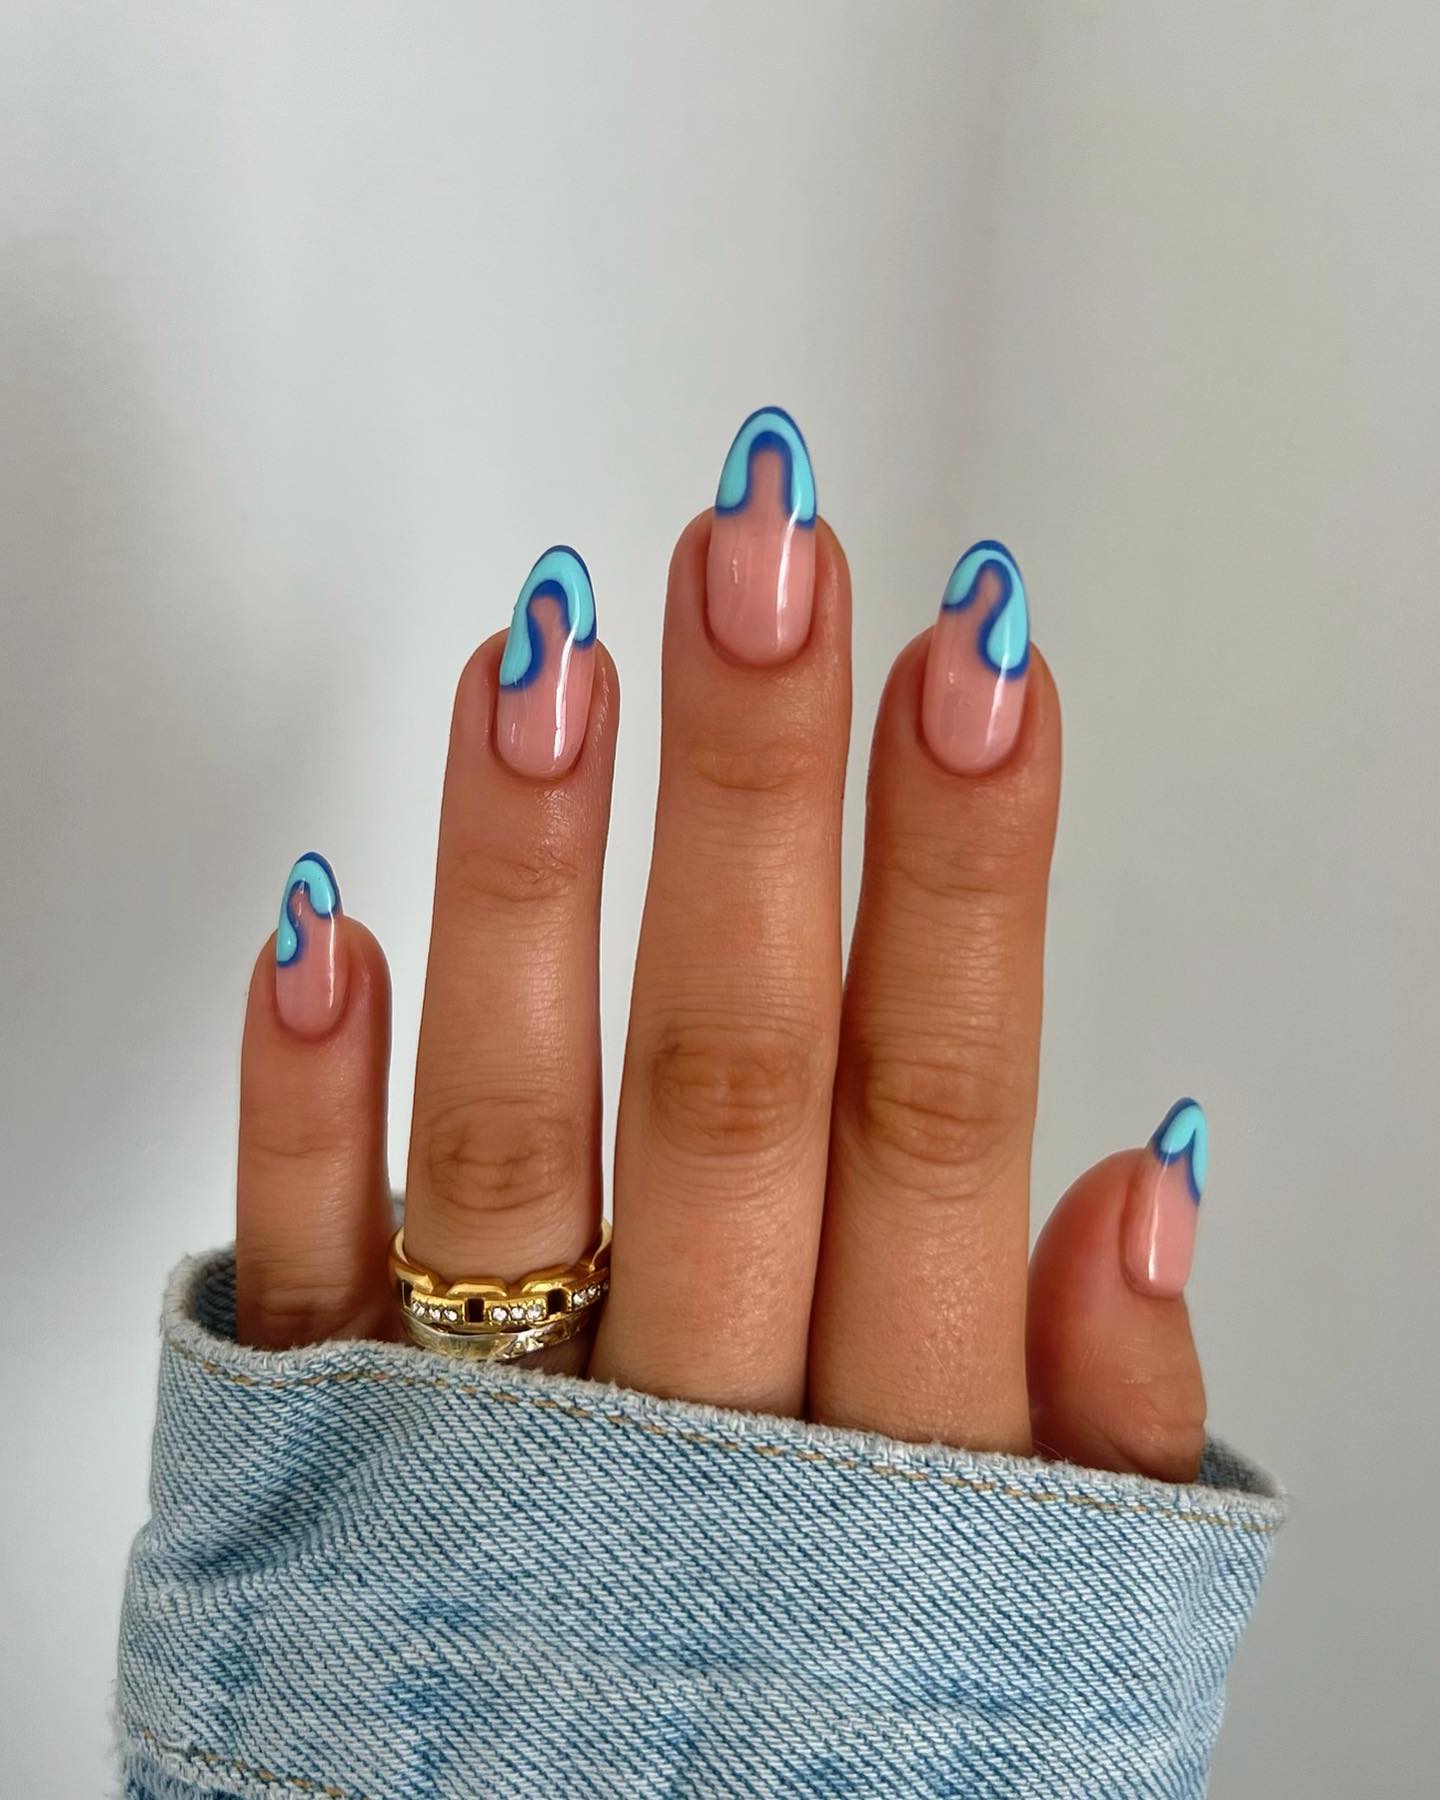 Try The Blueberry Milk Nails Trend With Light Blue French Tips - Lulus.com  Fashion Blog